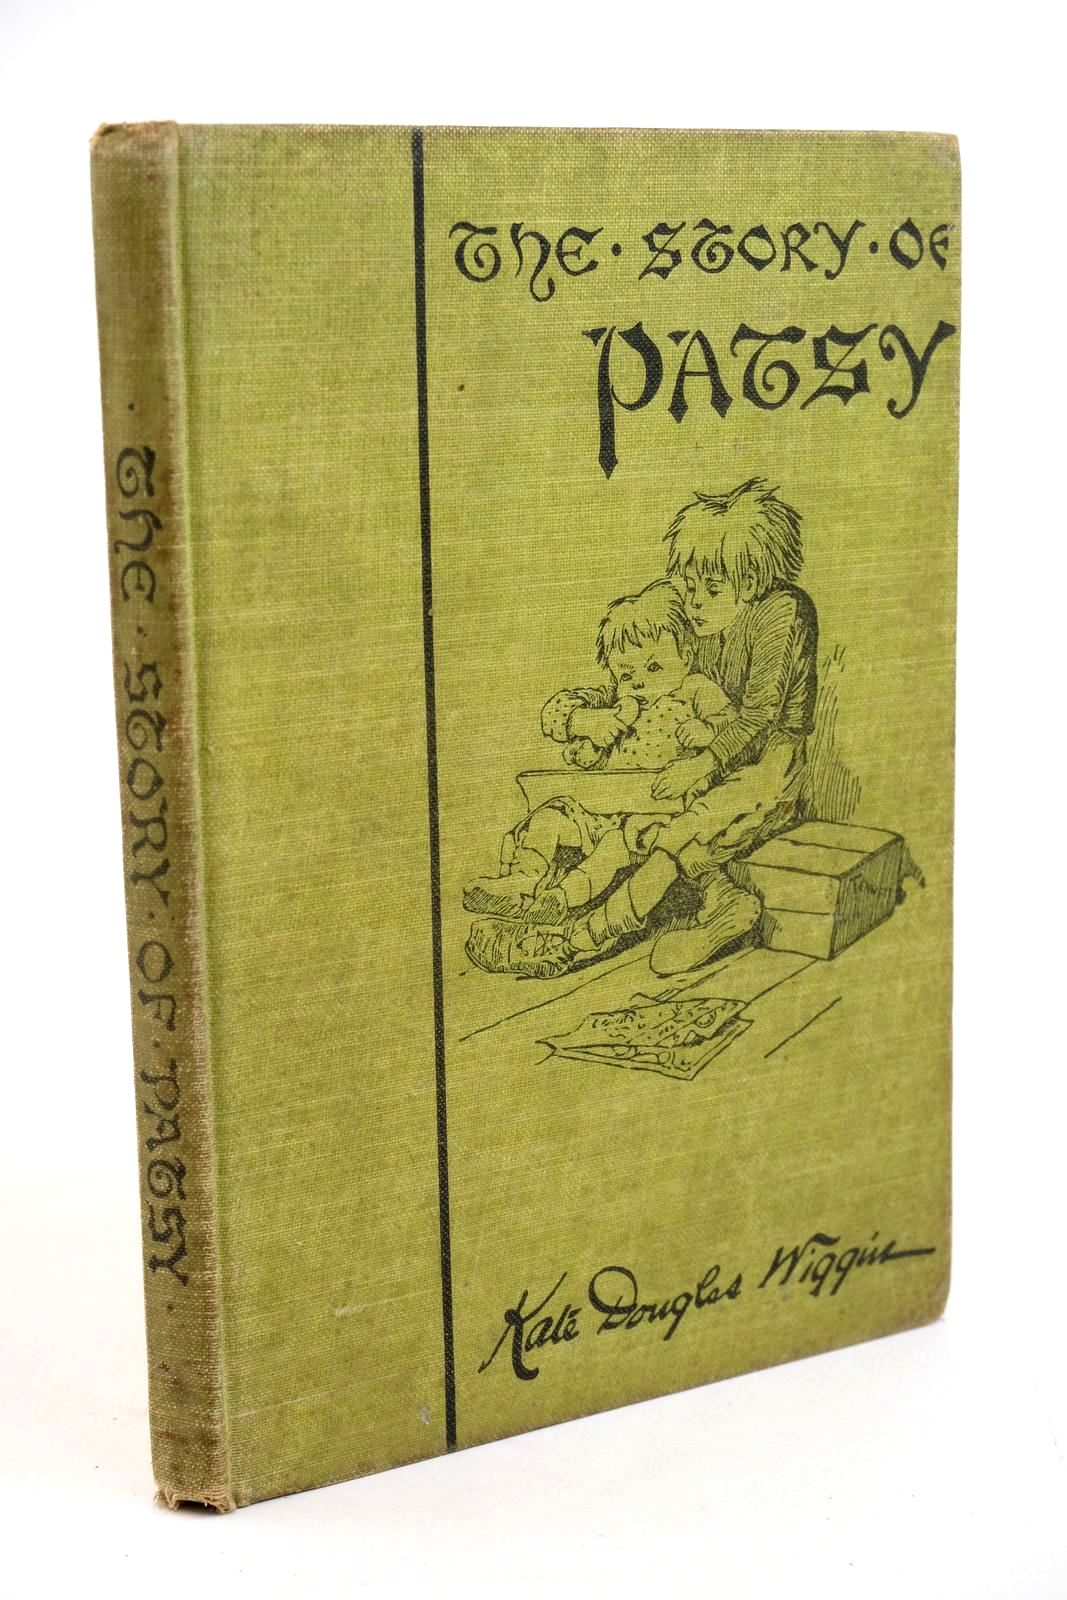 Photo of THE STORY OF PATSY written by Wiggin, Kate Douglas published by Houghton Mifflin and Company (STOCK CODE: 1321531)  for sale by Stella & Rose's Books